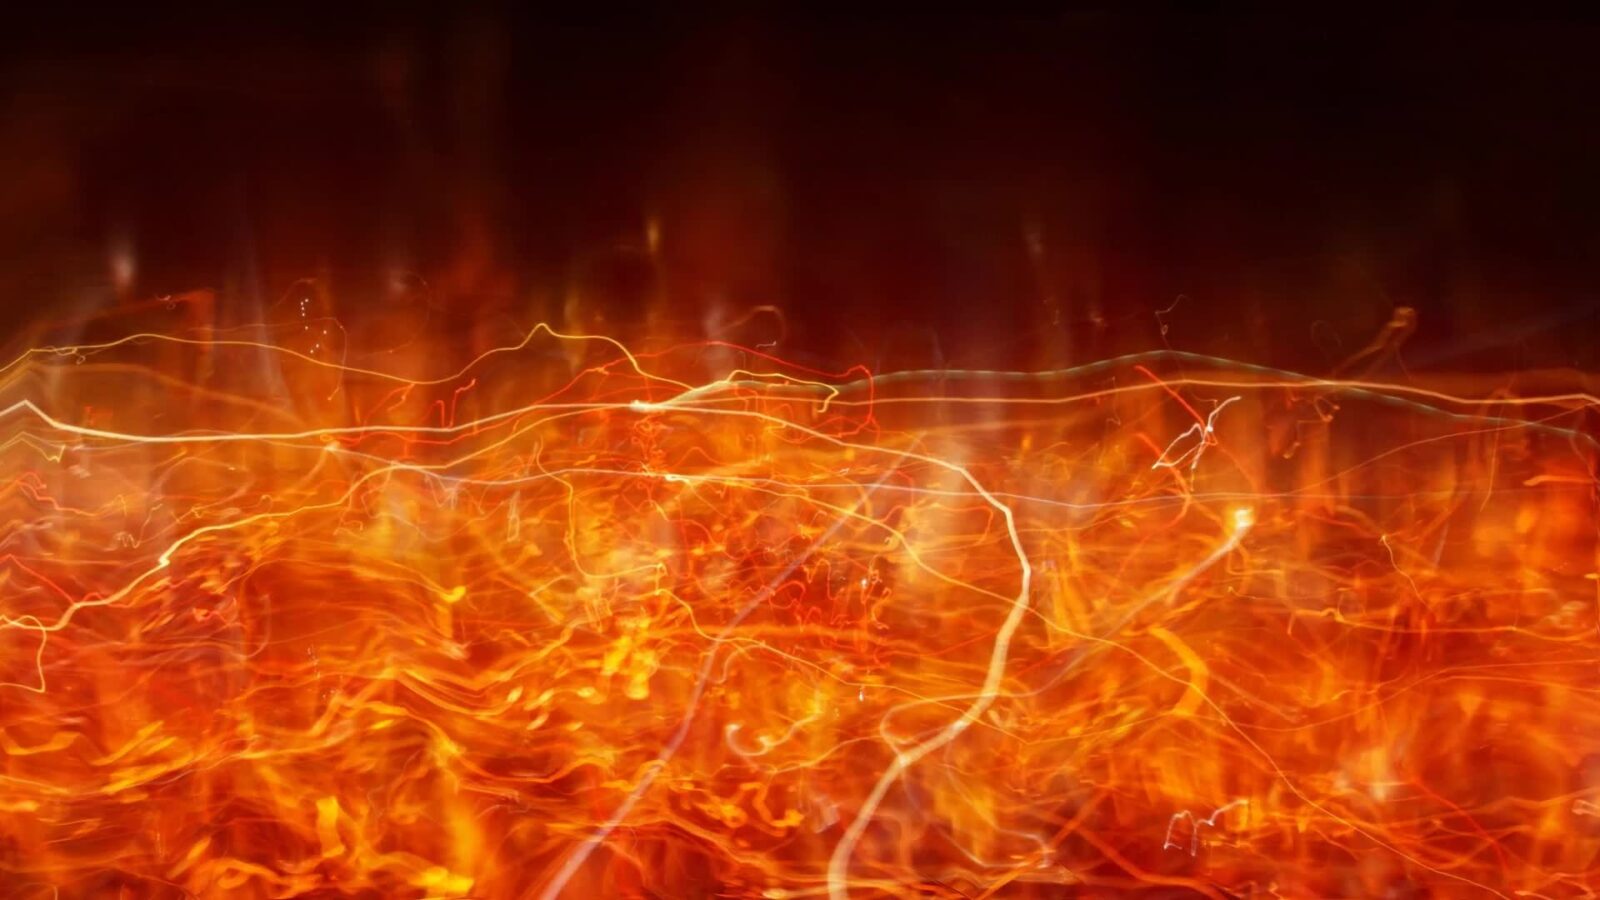 Fire Lava Abstract Shapes - Free Live Wallpaper - Live Desktop Wallpapers